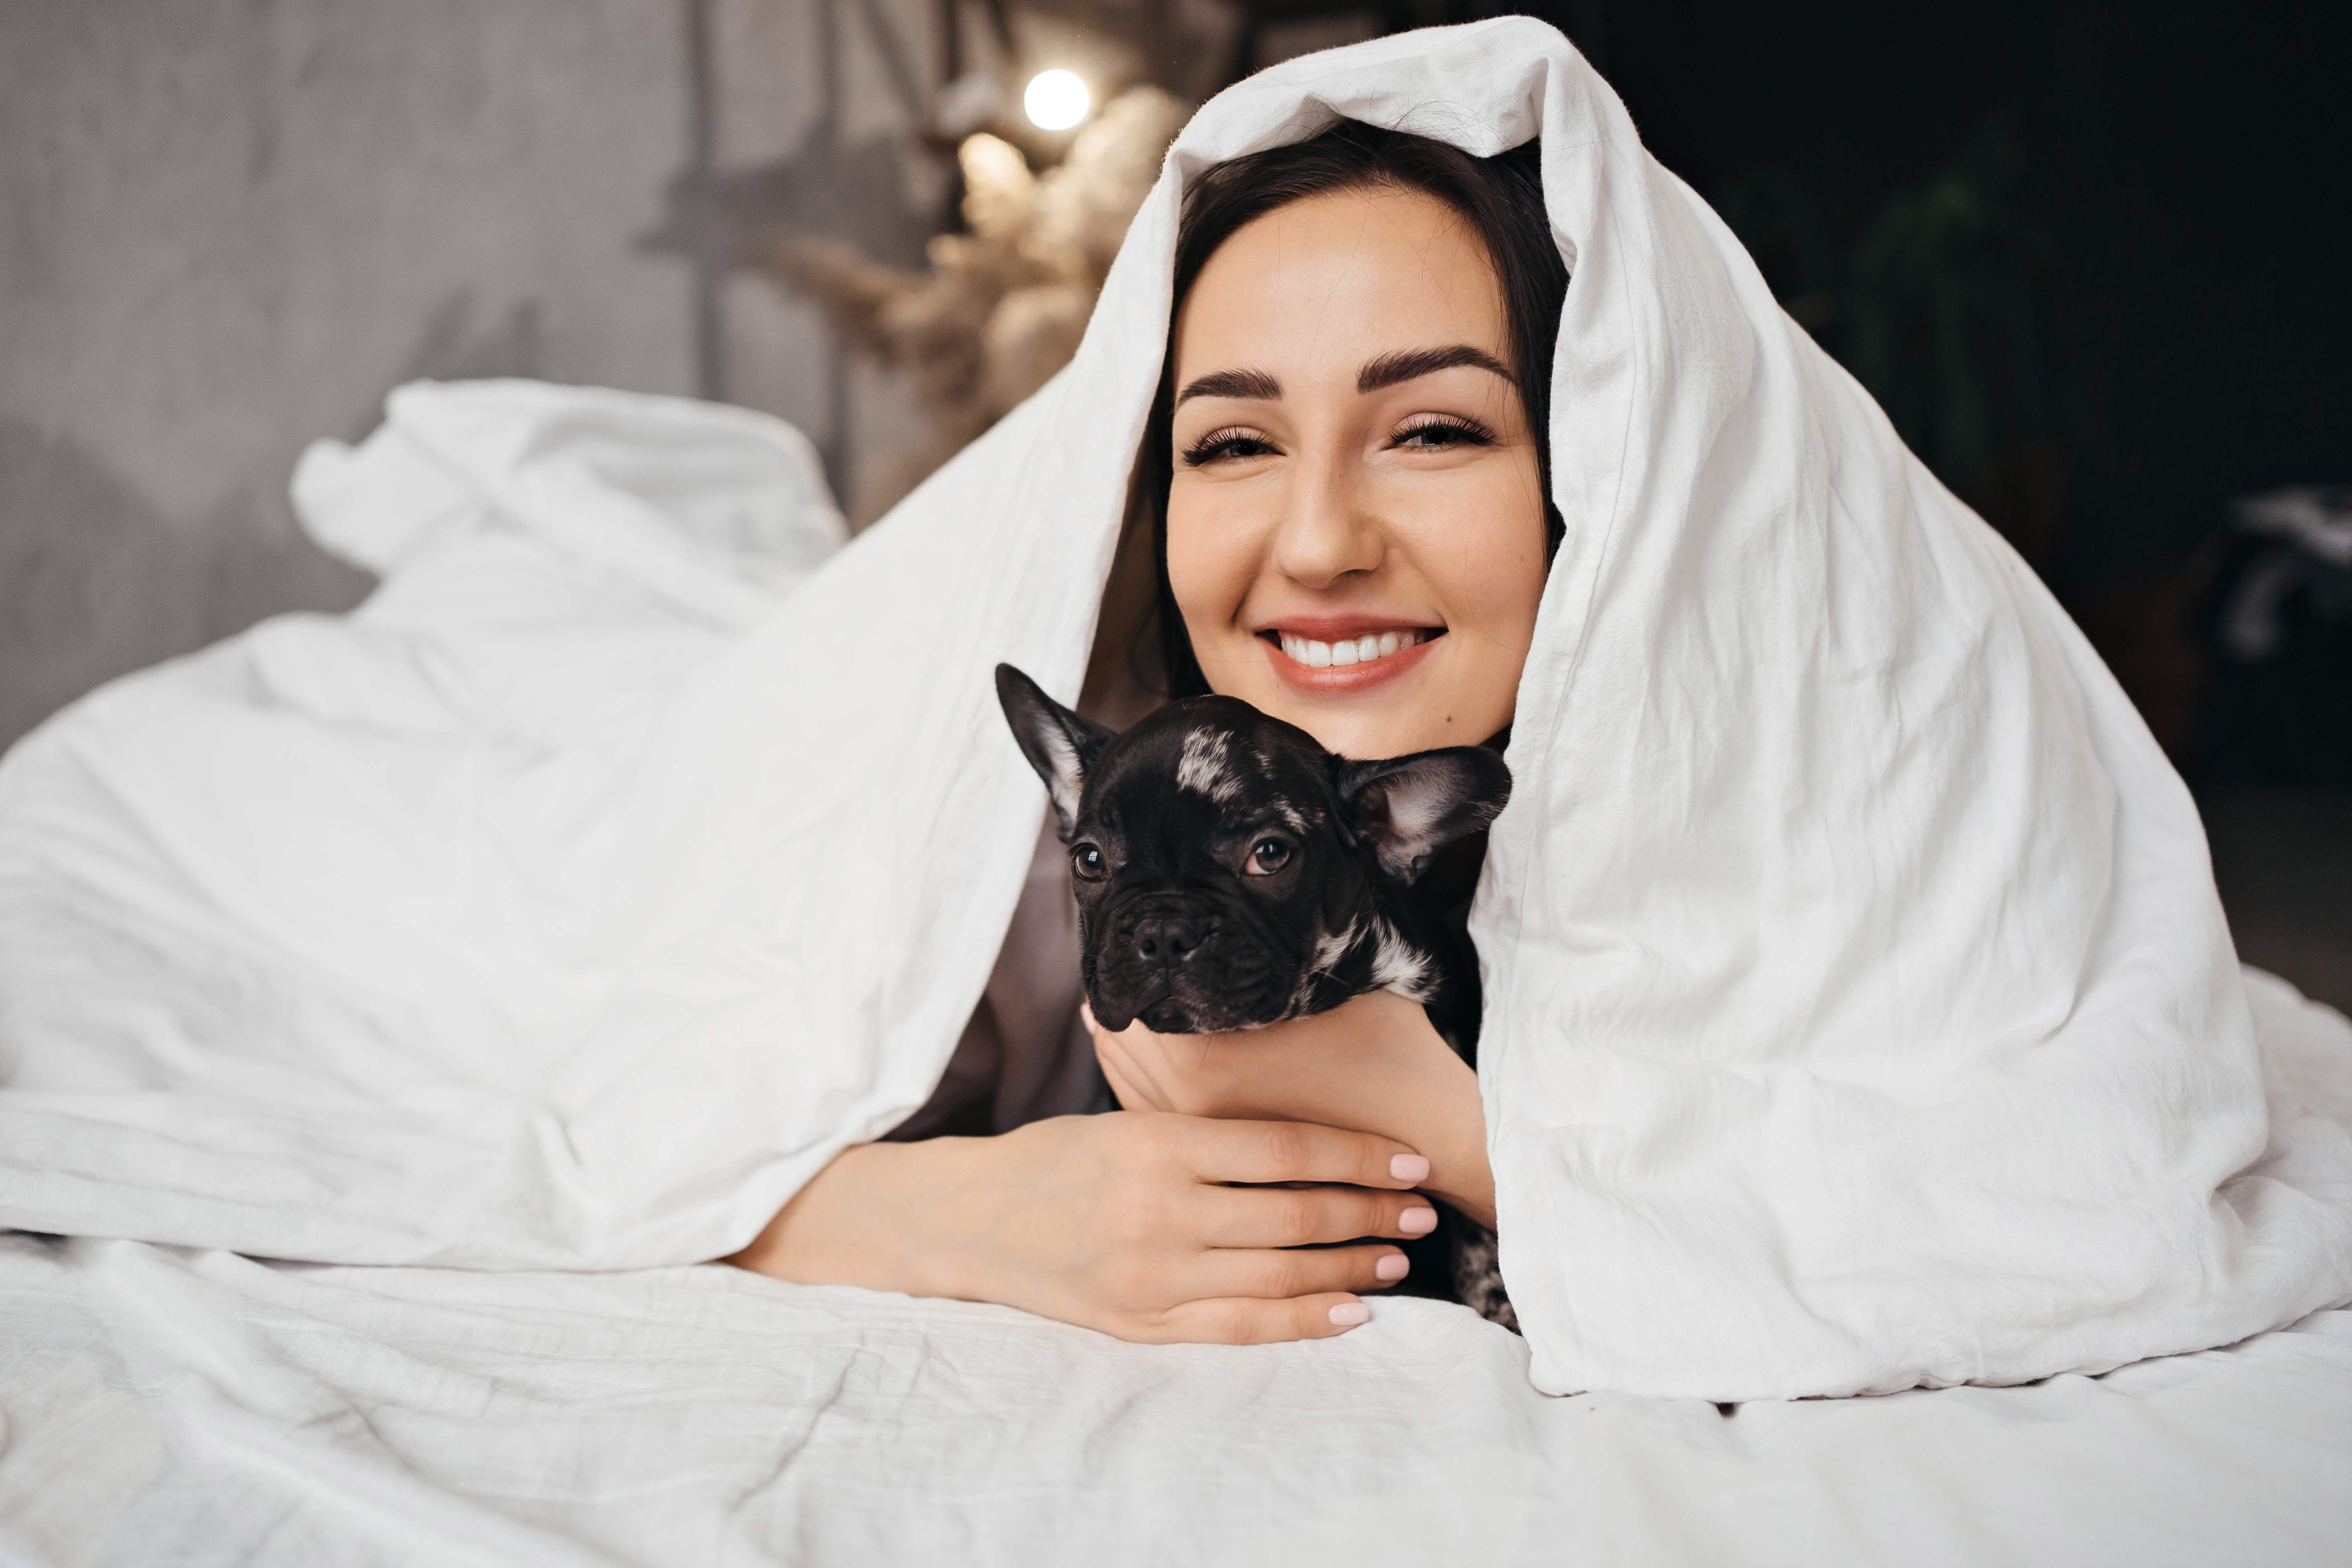 A woman relieves stress by cuddling her dog underneath a weighted blanket.